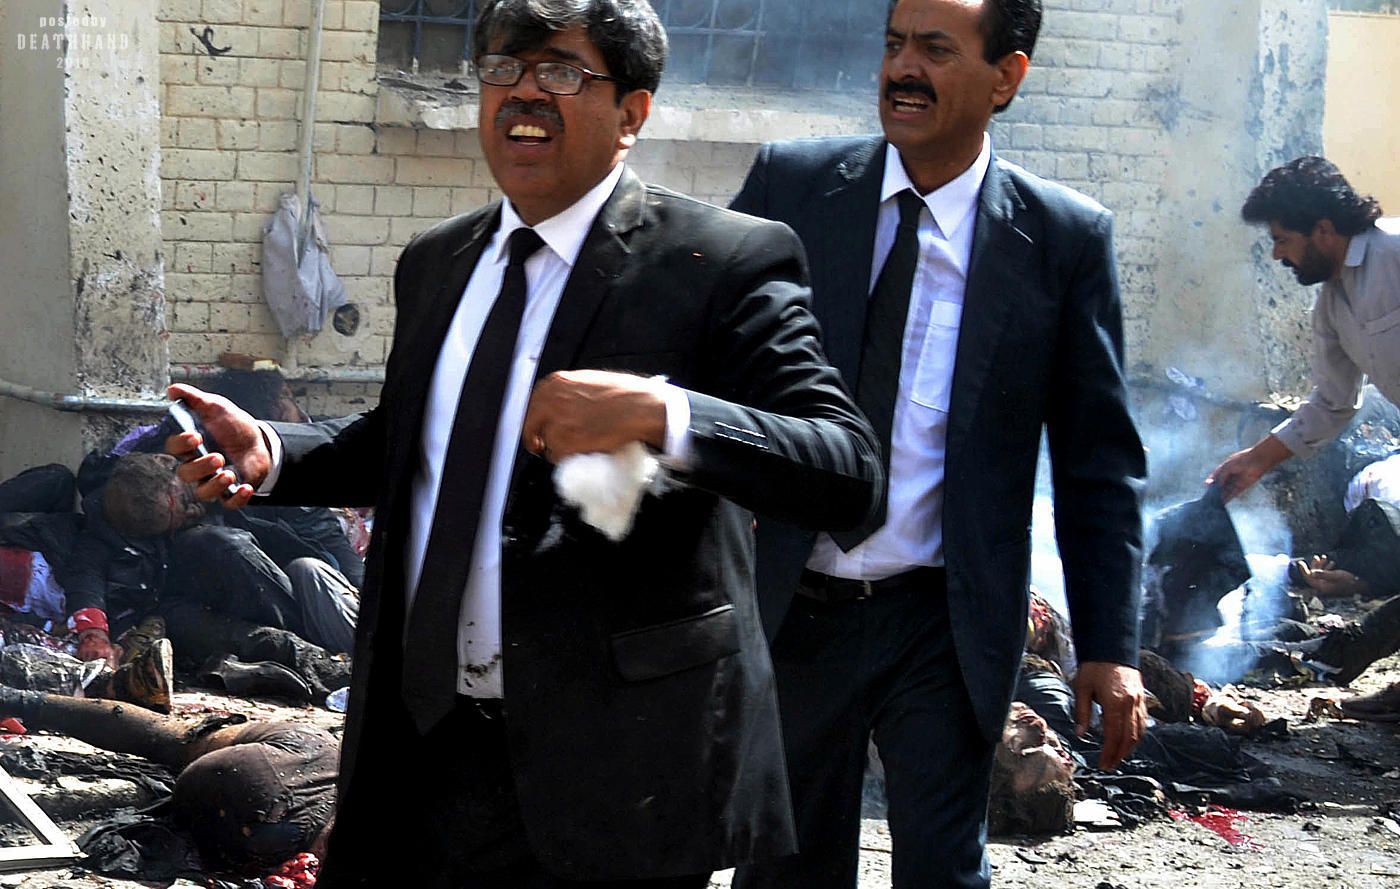 lawyer-killed-mourners-at-hospital-hit-by-suicide-bomber-7-Quetta-PK-aug-8-16.jpg